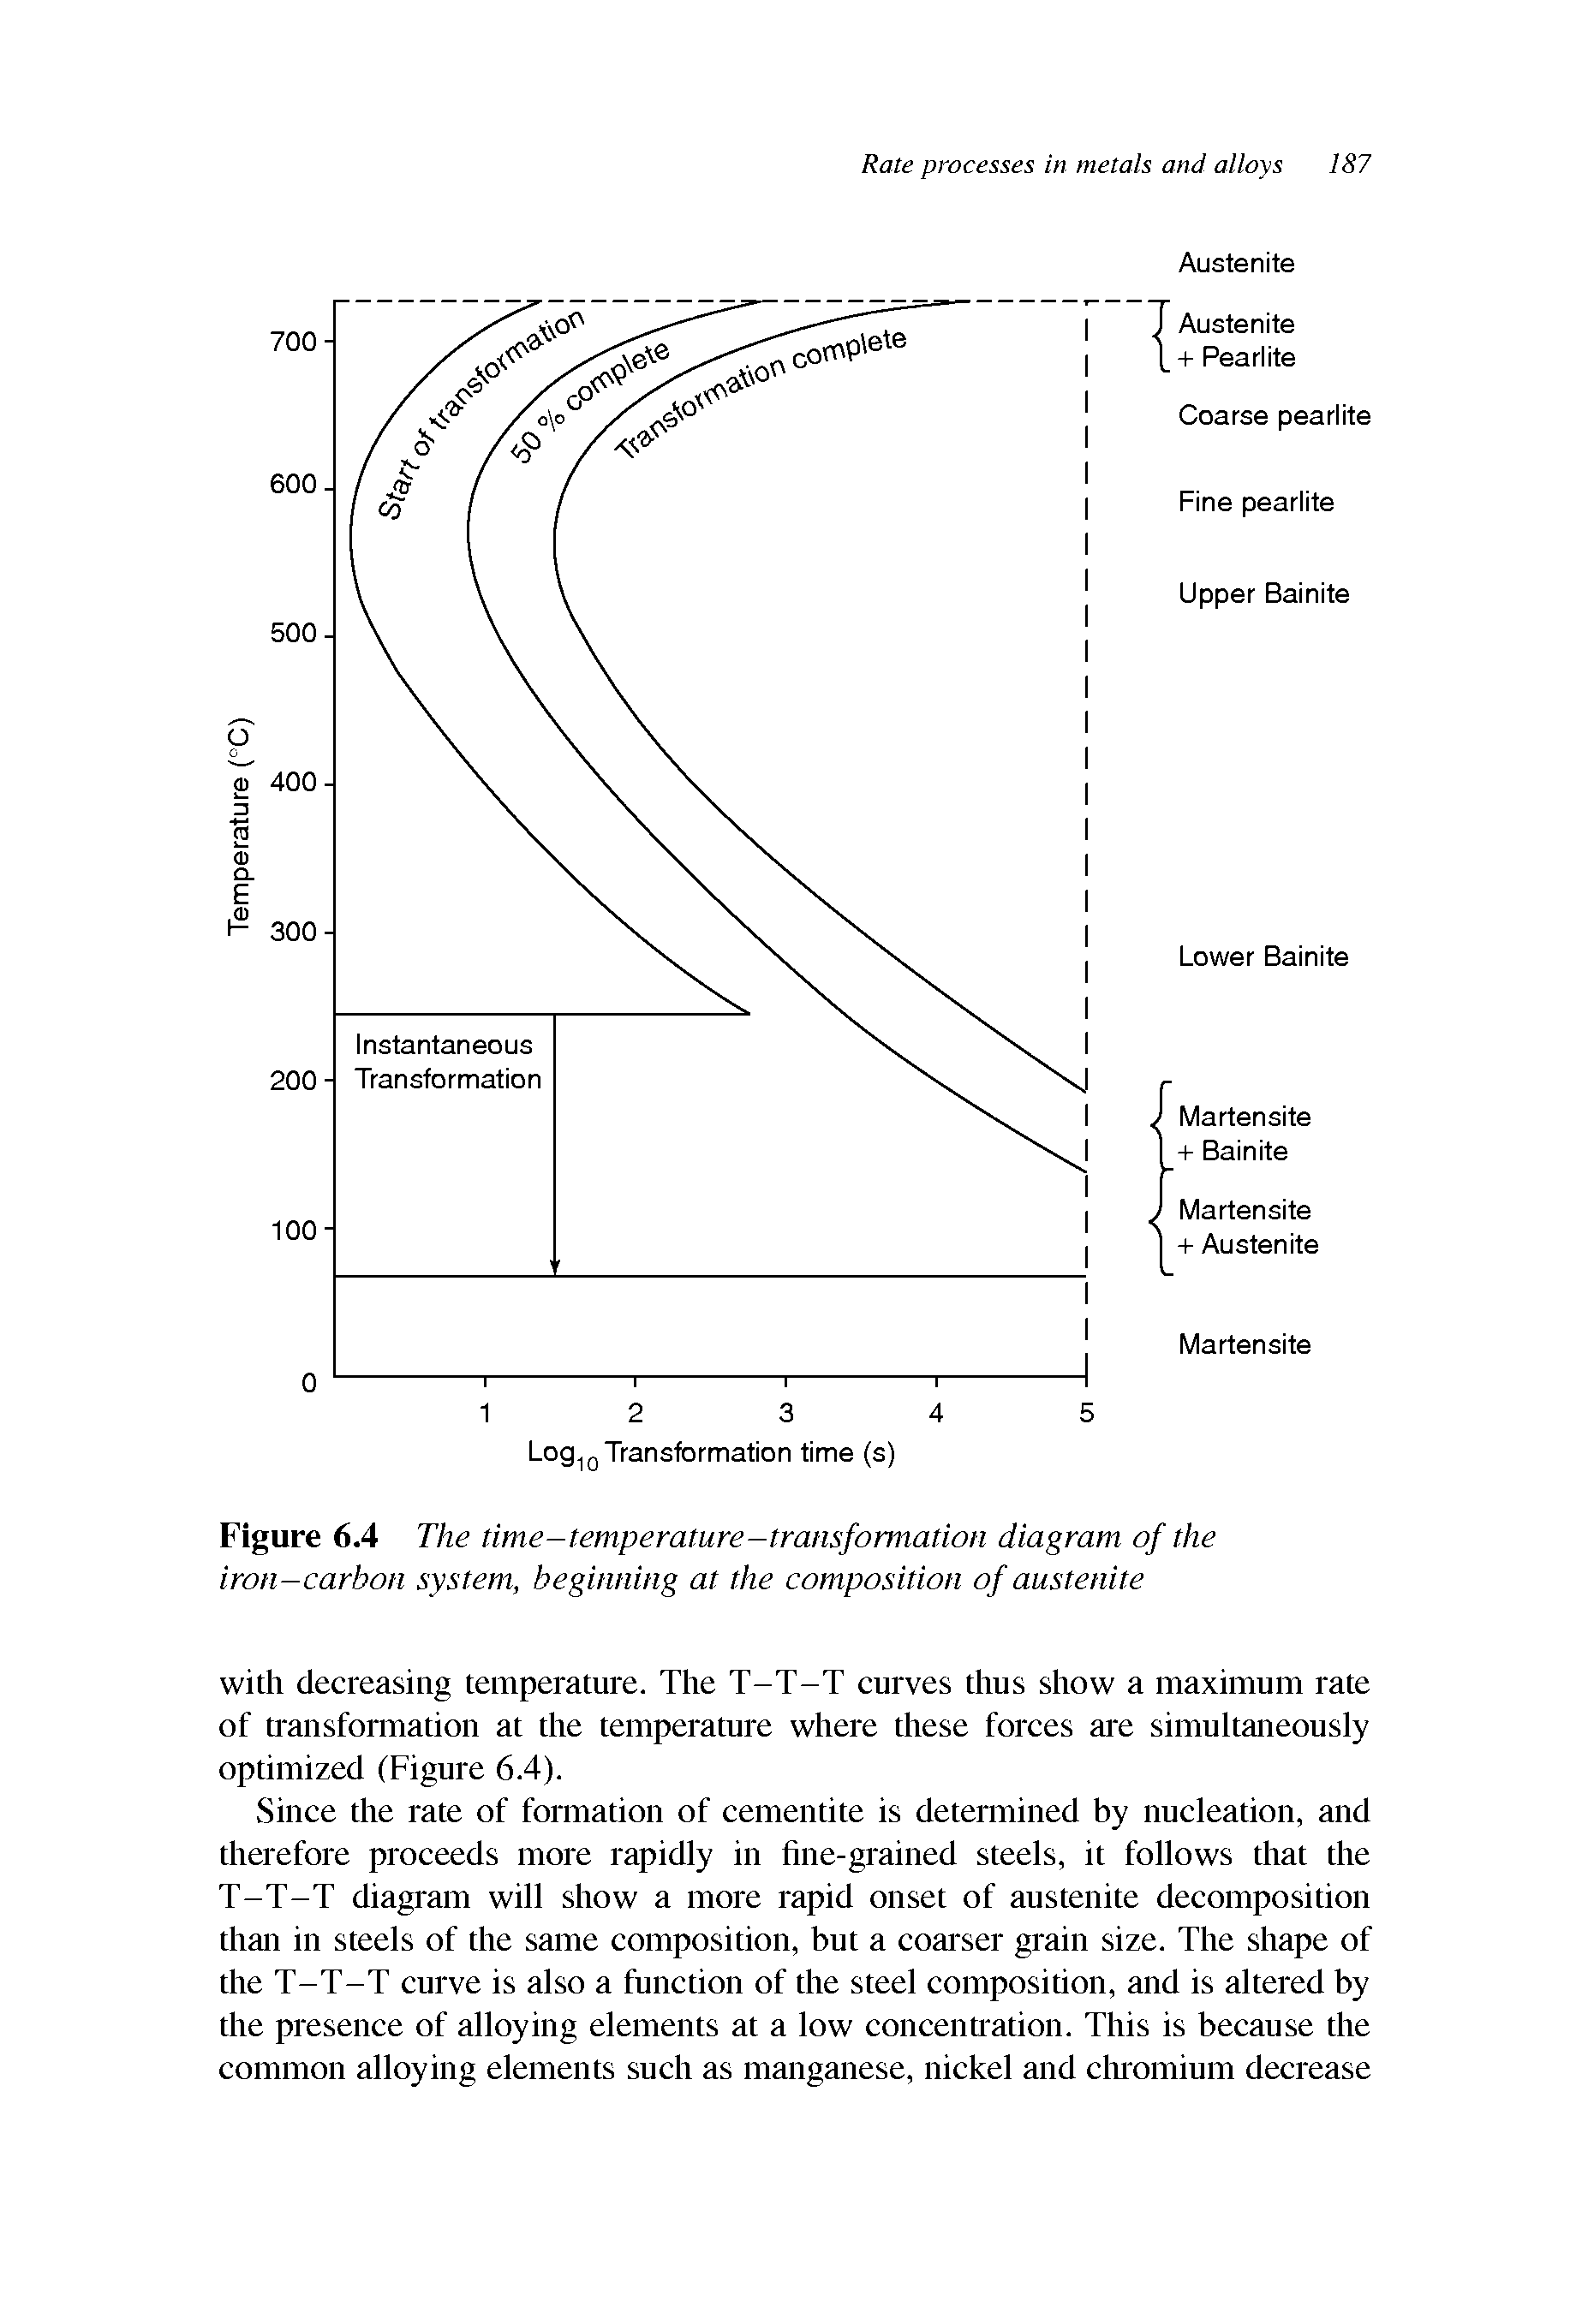 Figure 6.4 The time-temperature-transformation diagram of the iron-carbon system, beginning at the composition of austenite...